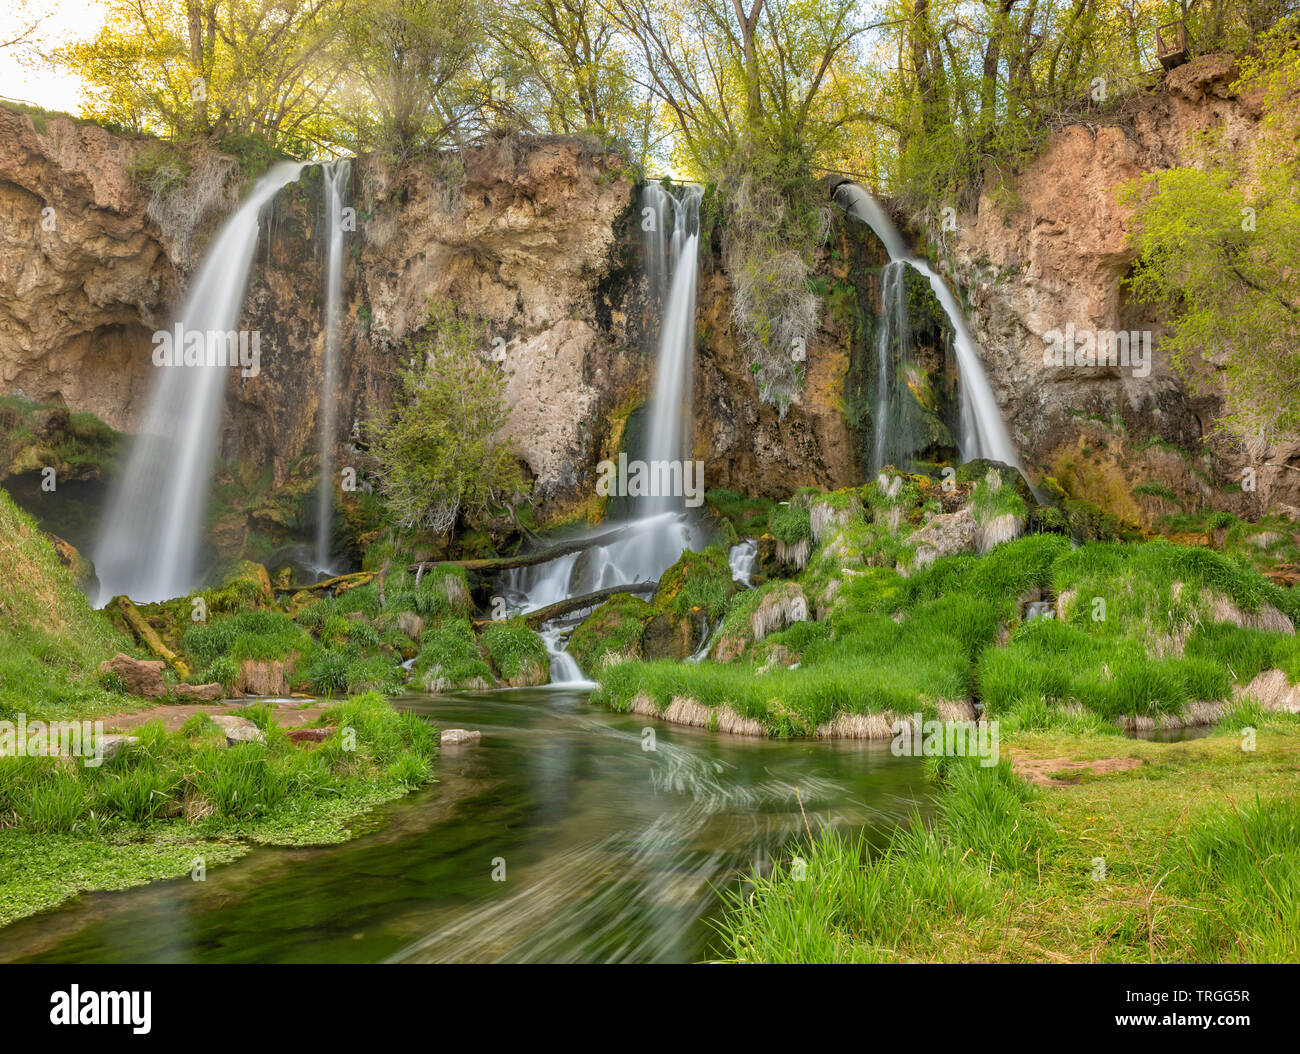 A long exposure of a triple falls at Rifle Falls in the lush Springtime, in Rifle Falls State Park, Colorado. Stock Photo